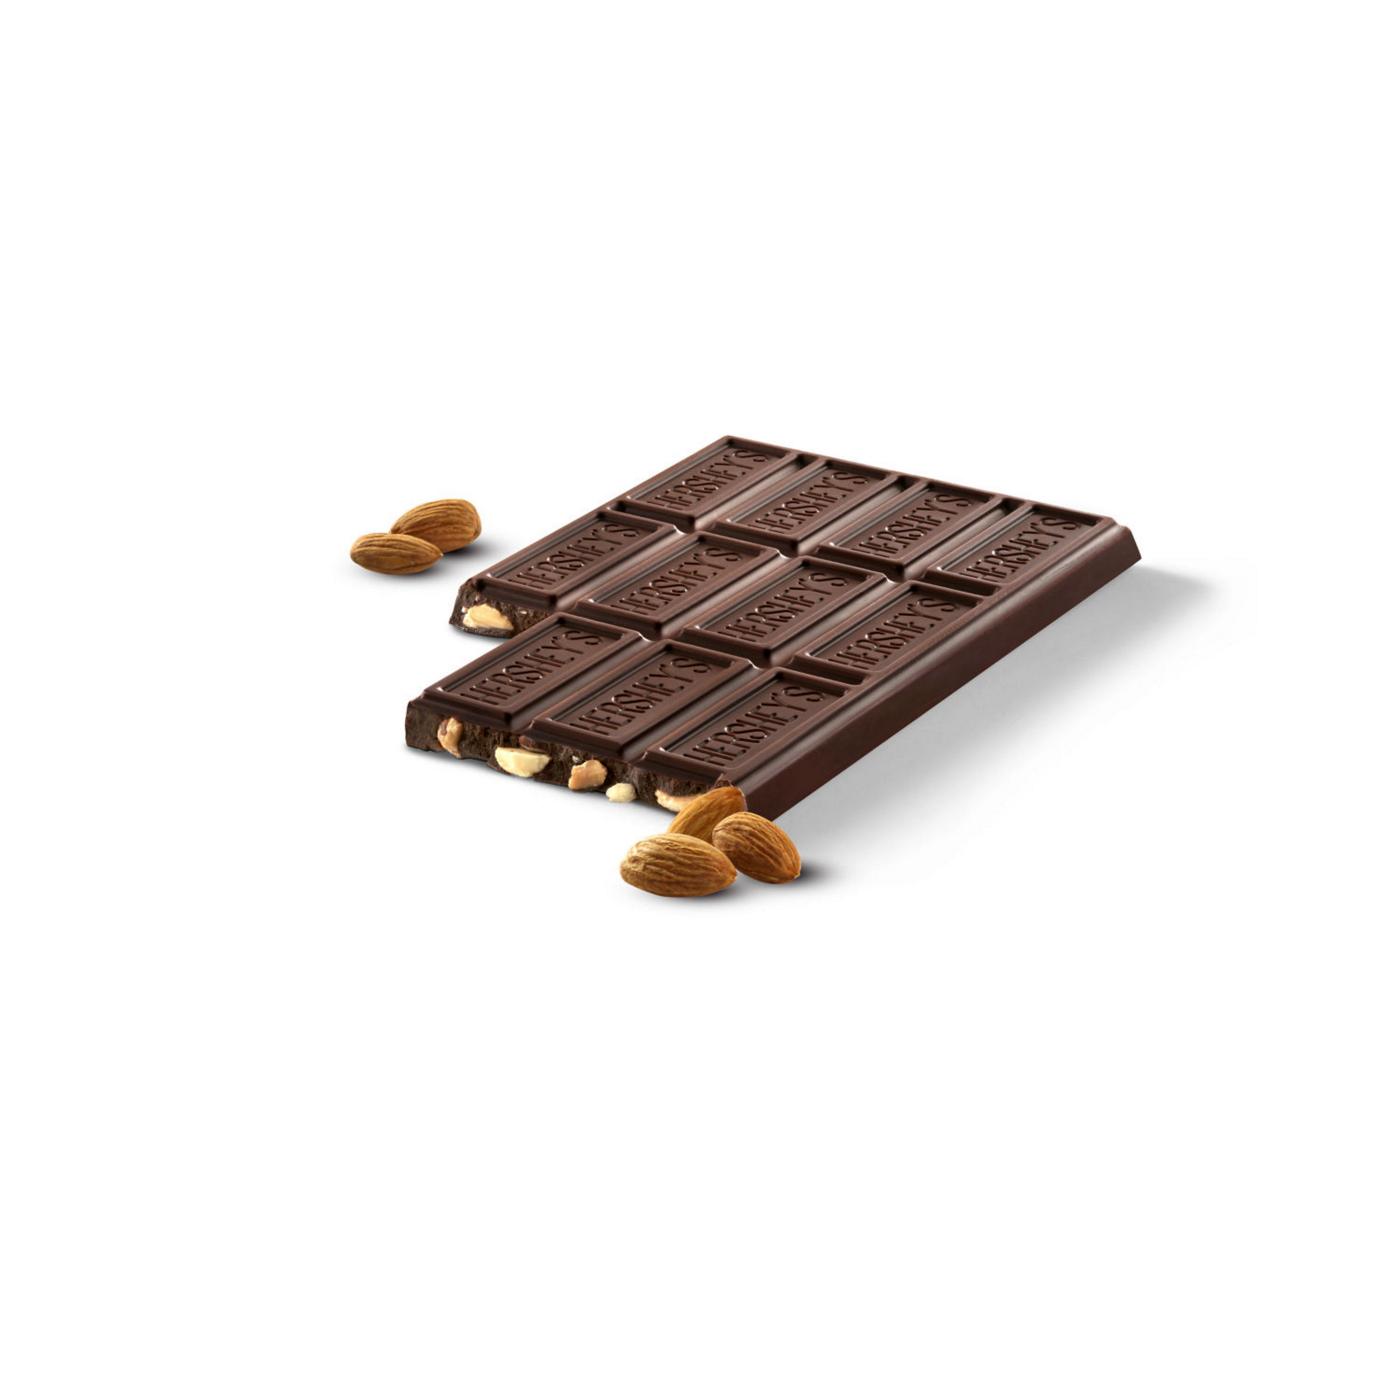 Hershey's Special Dark Mildly Sweet Chocolate With Almonds XL Candy Bar; image 8 of 8